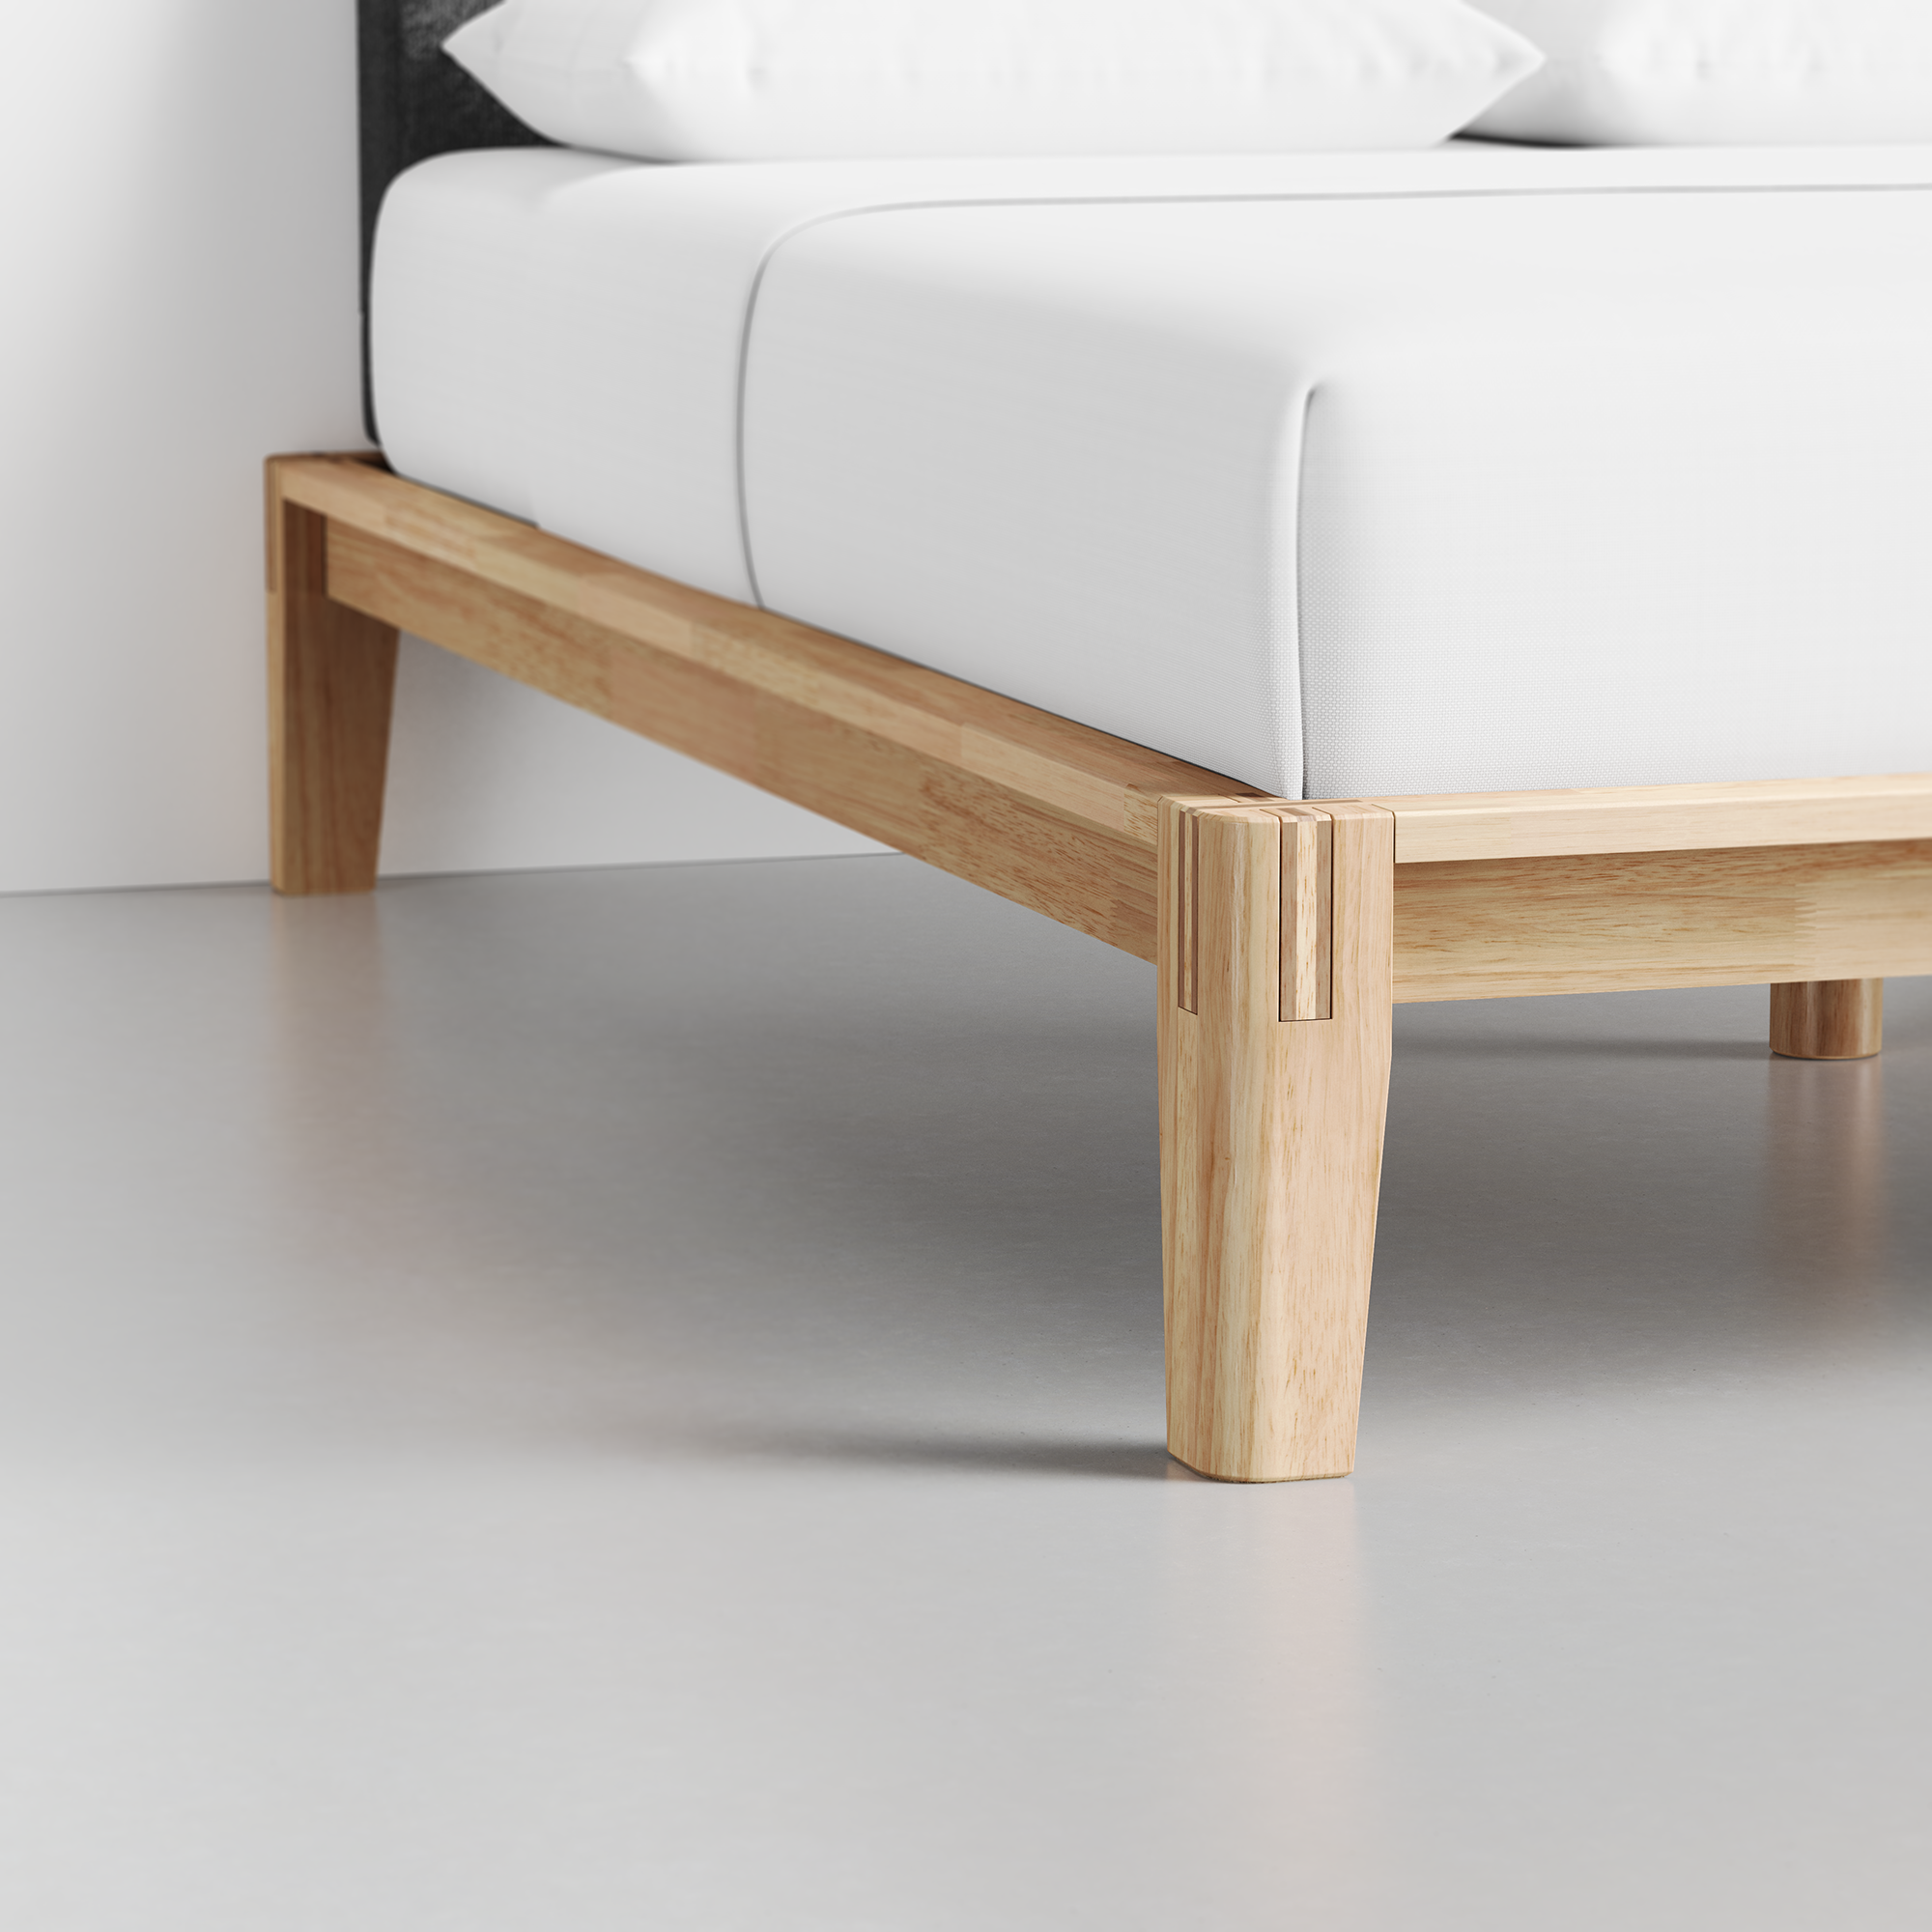 The Bed (Natural / Graphite) - Render - Foot Detail